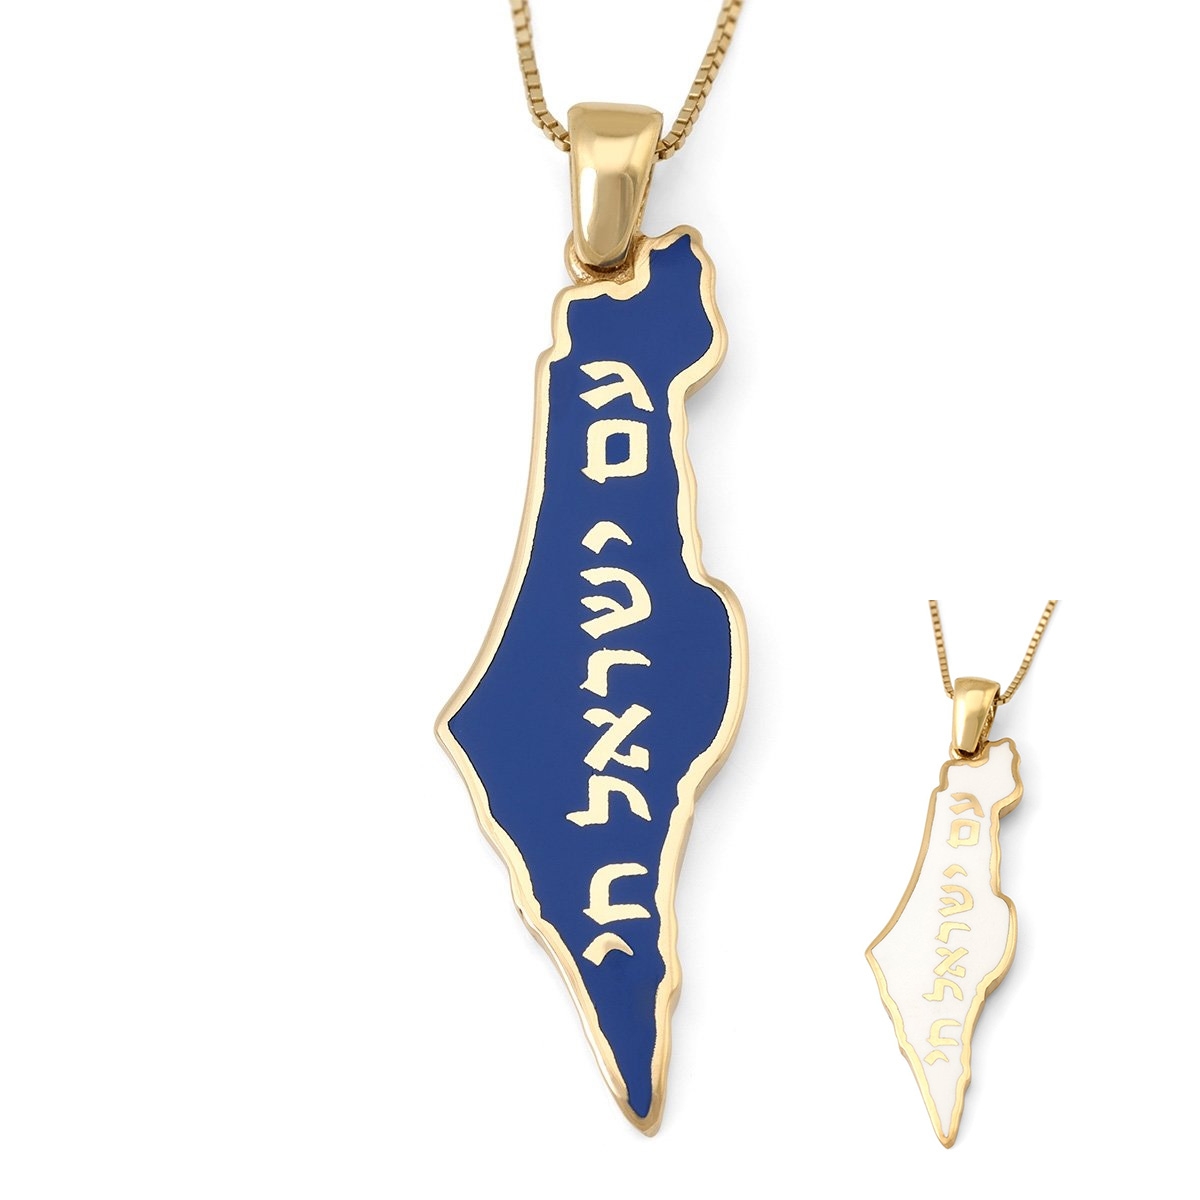 14K Gold and Blue Enamel Map of Israel Pendant with Am Yisrael Chai - 1